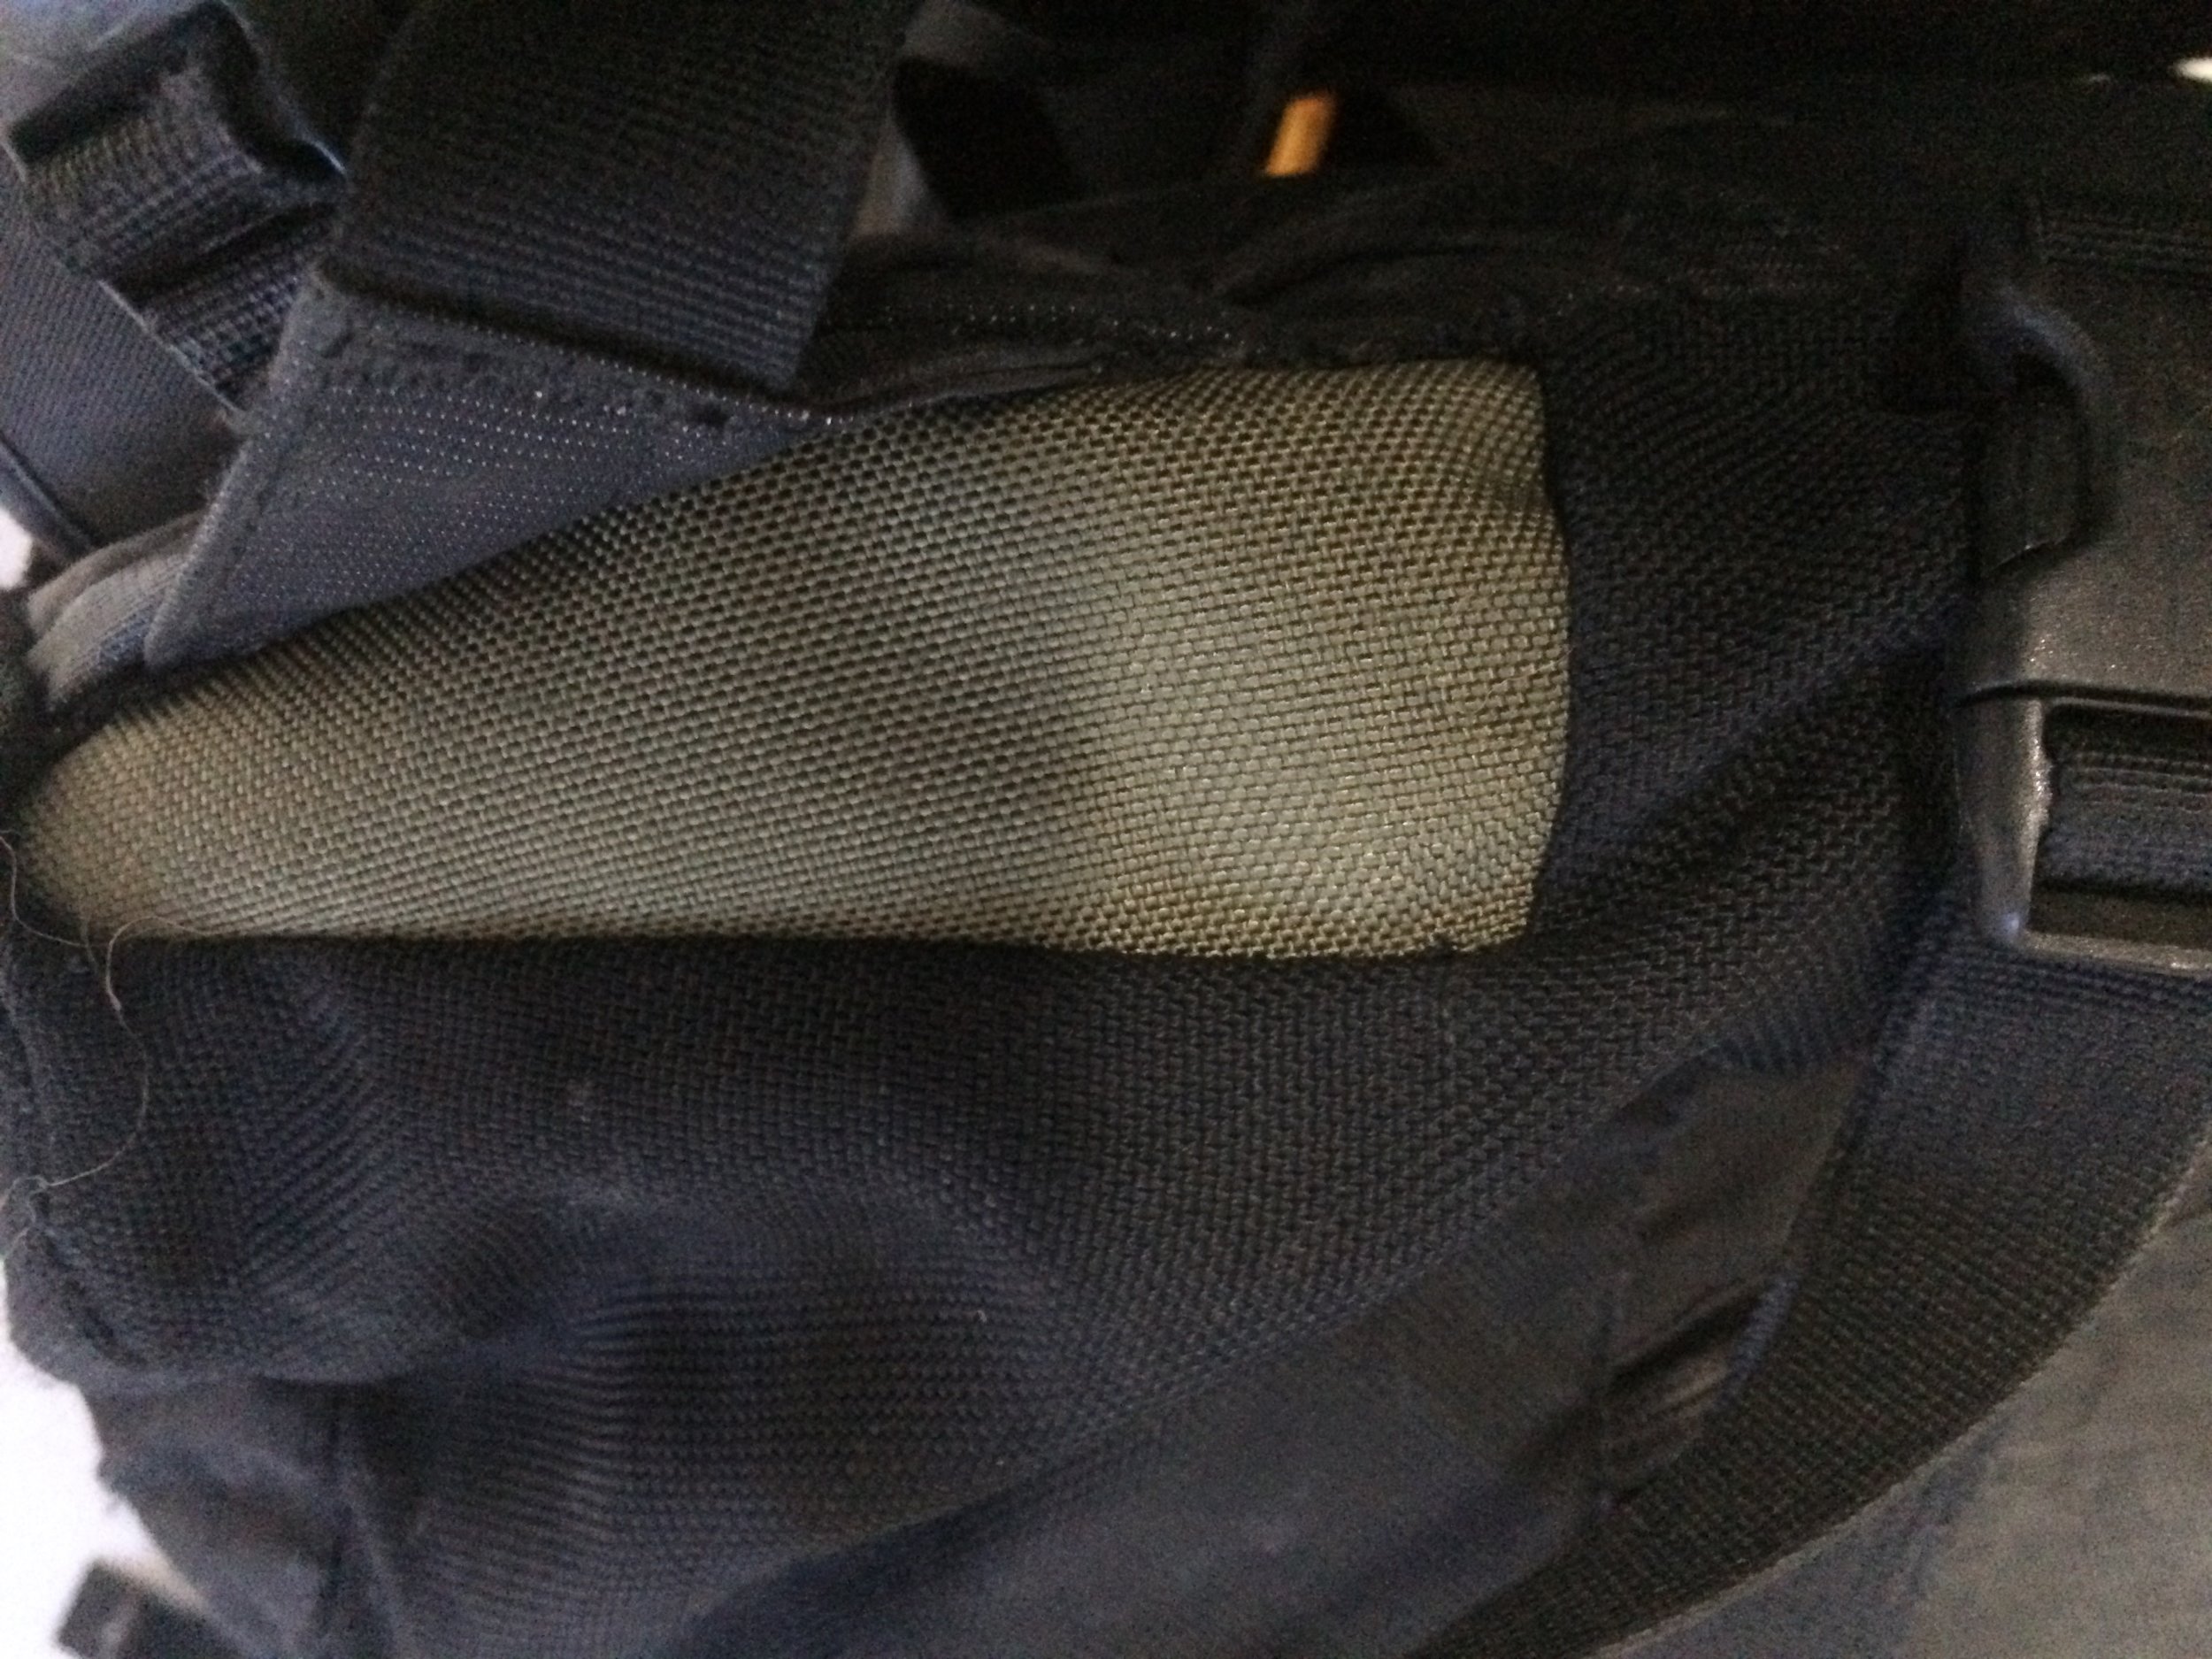 Backpack patching